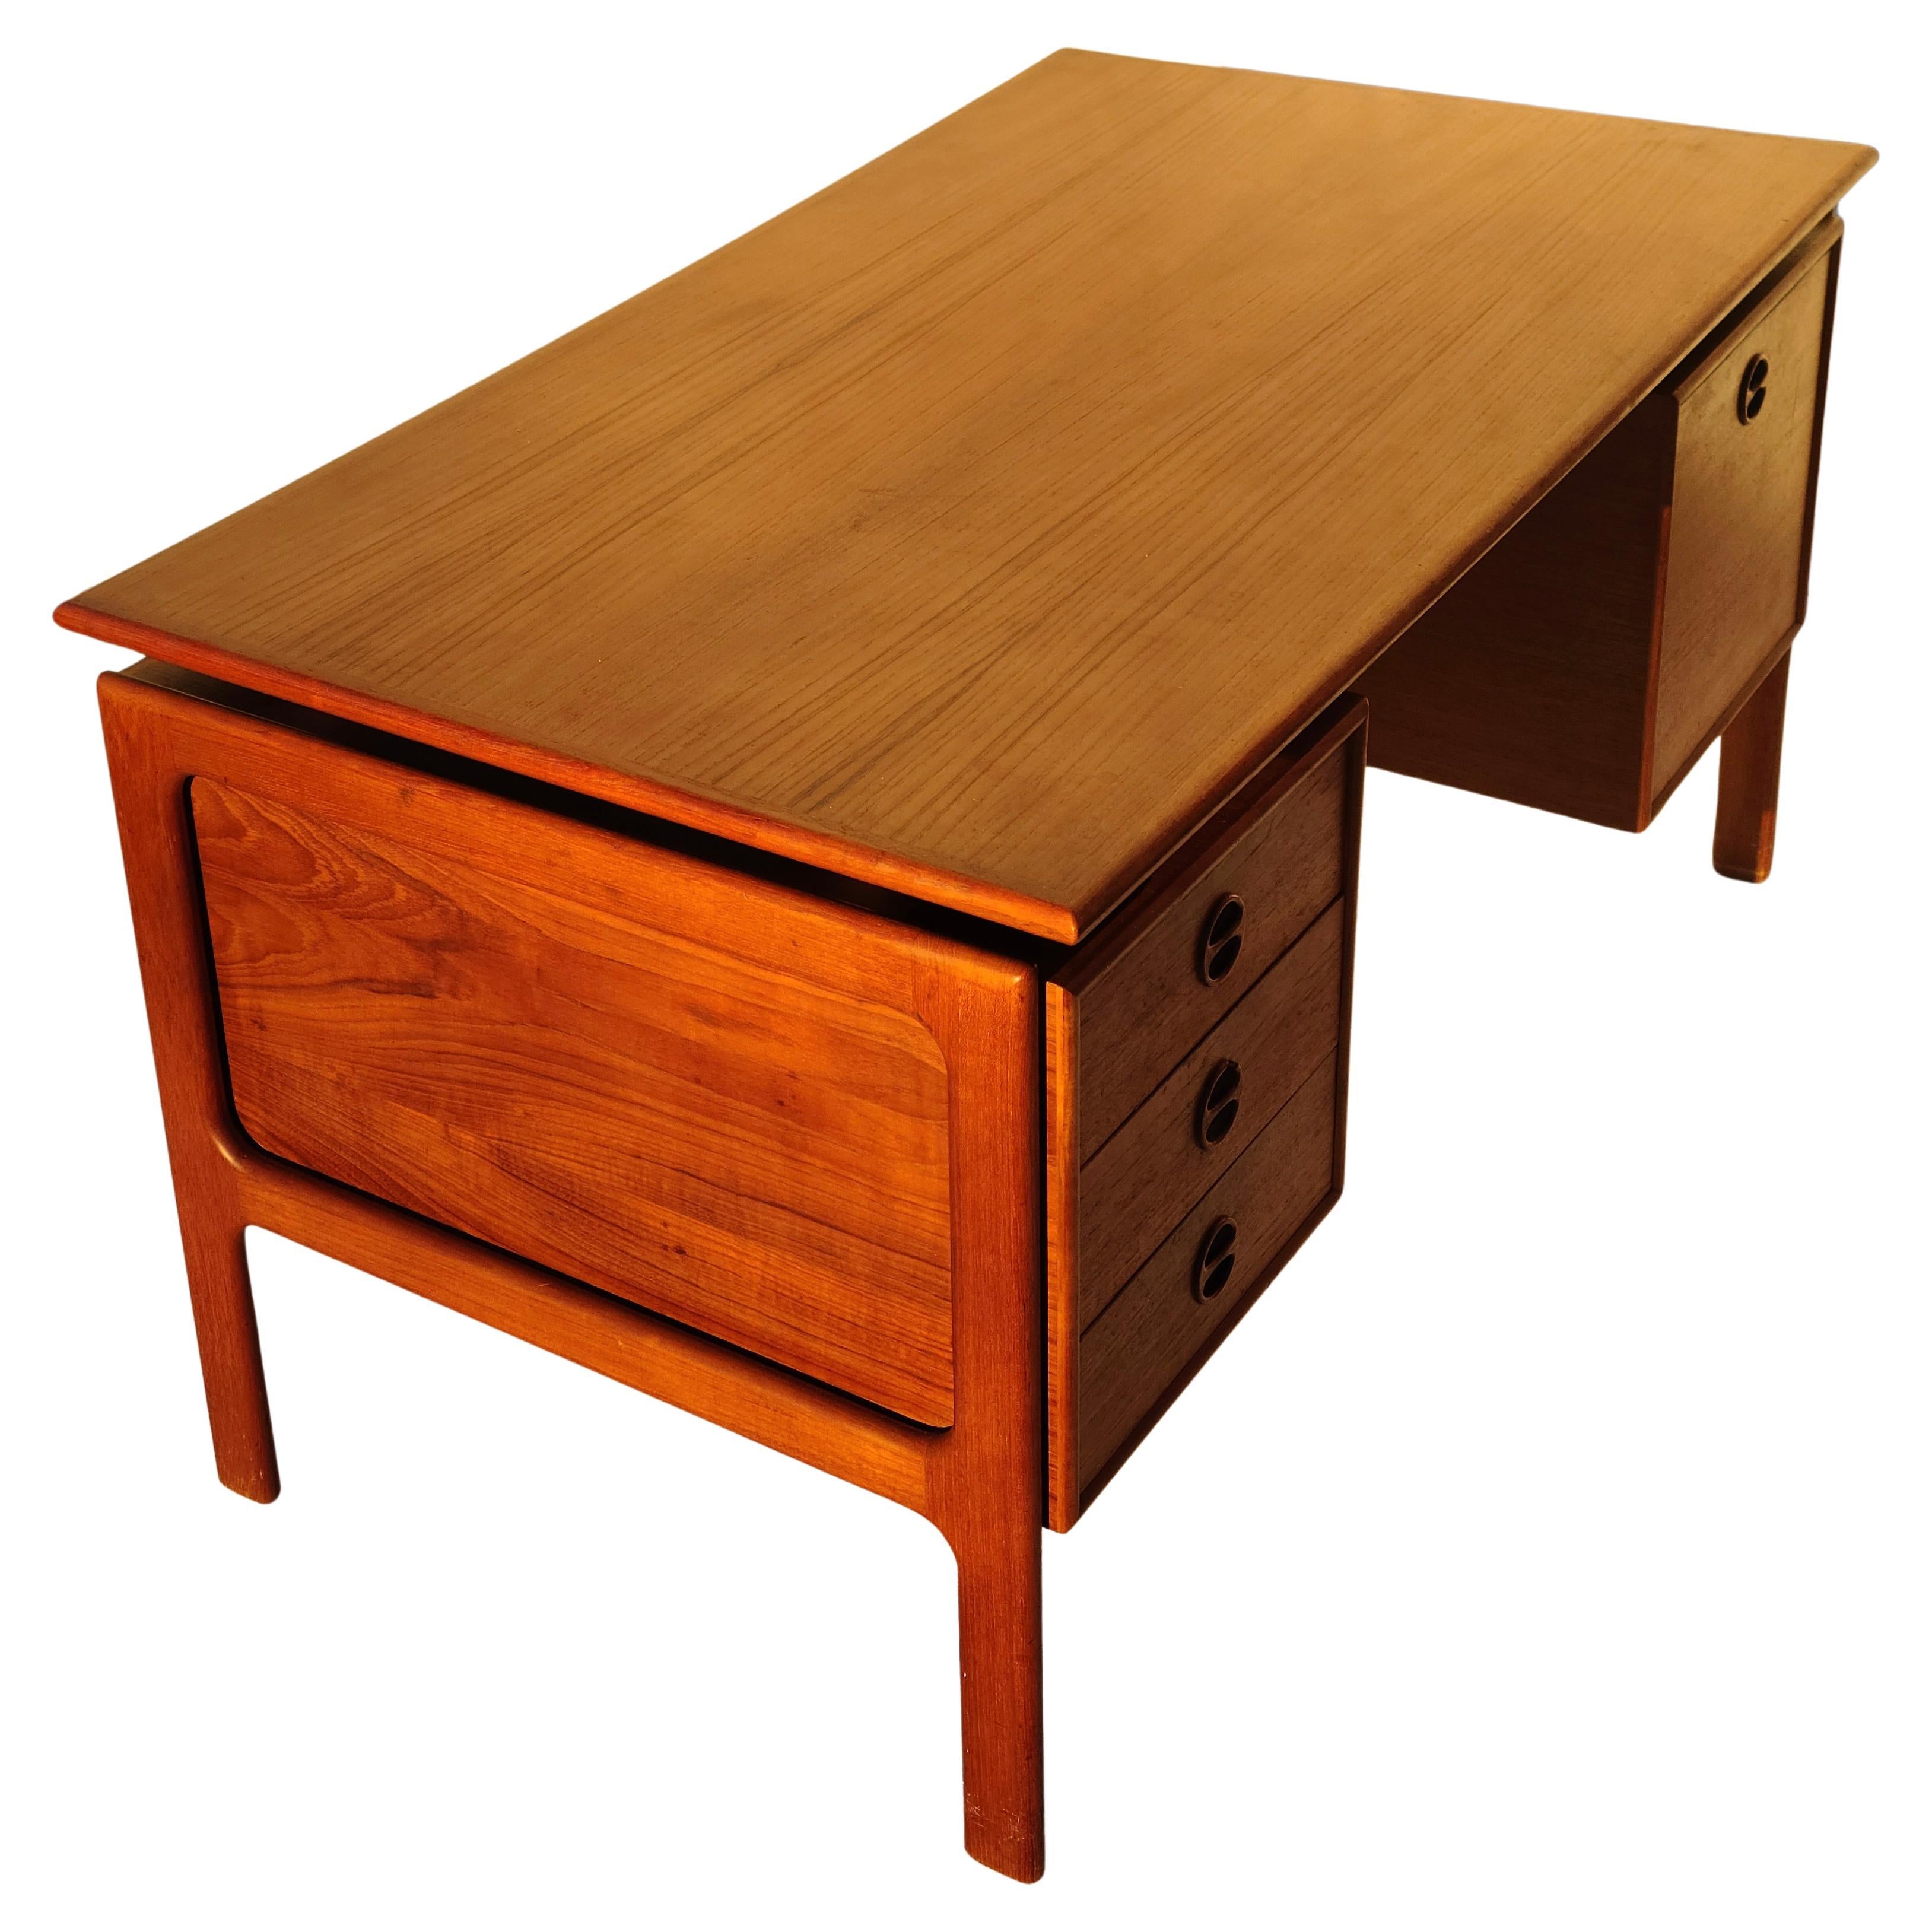 Please feel free to reach out for accurate shipping quote to your location.

Danish Teak Desk by Arne Vodder.